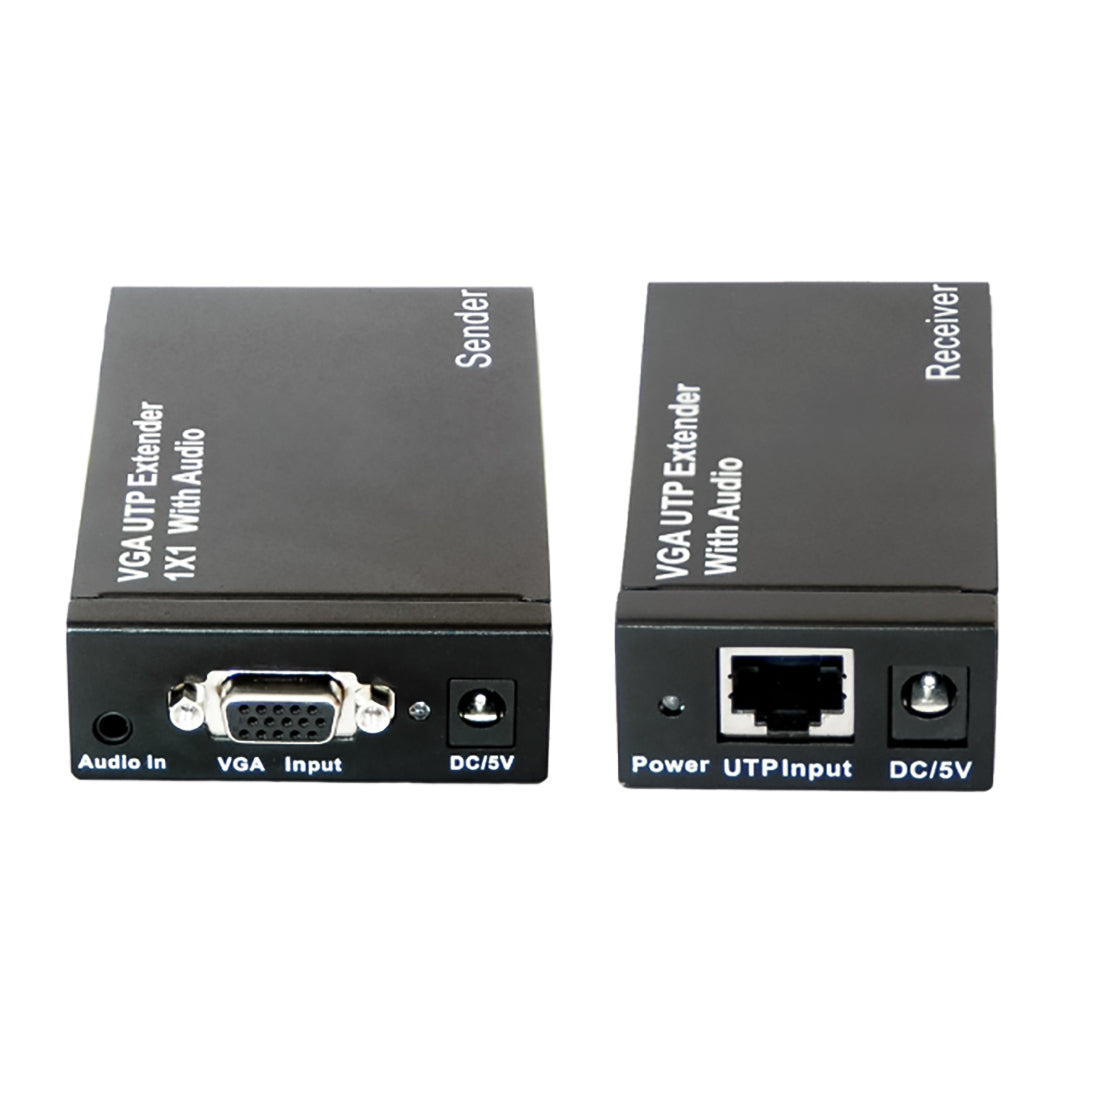 GBC VGA Extender Adapter to Ethernet Cable up to 300m with Audio, VGA Extender